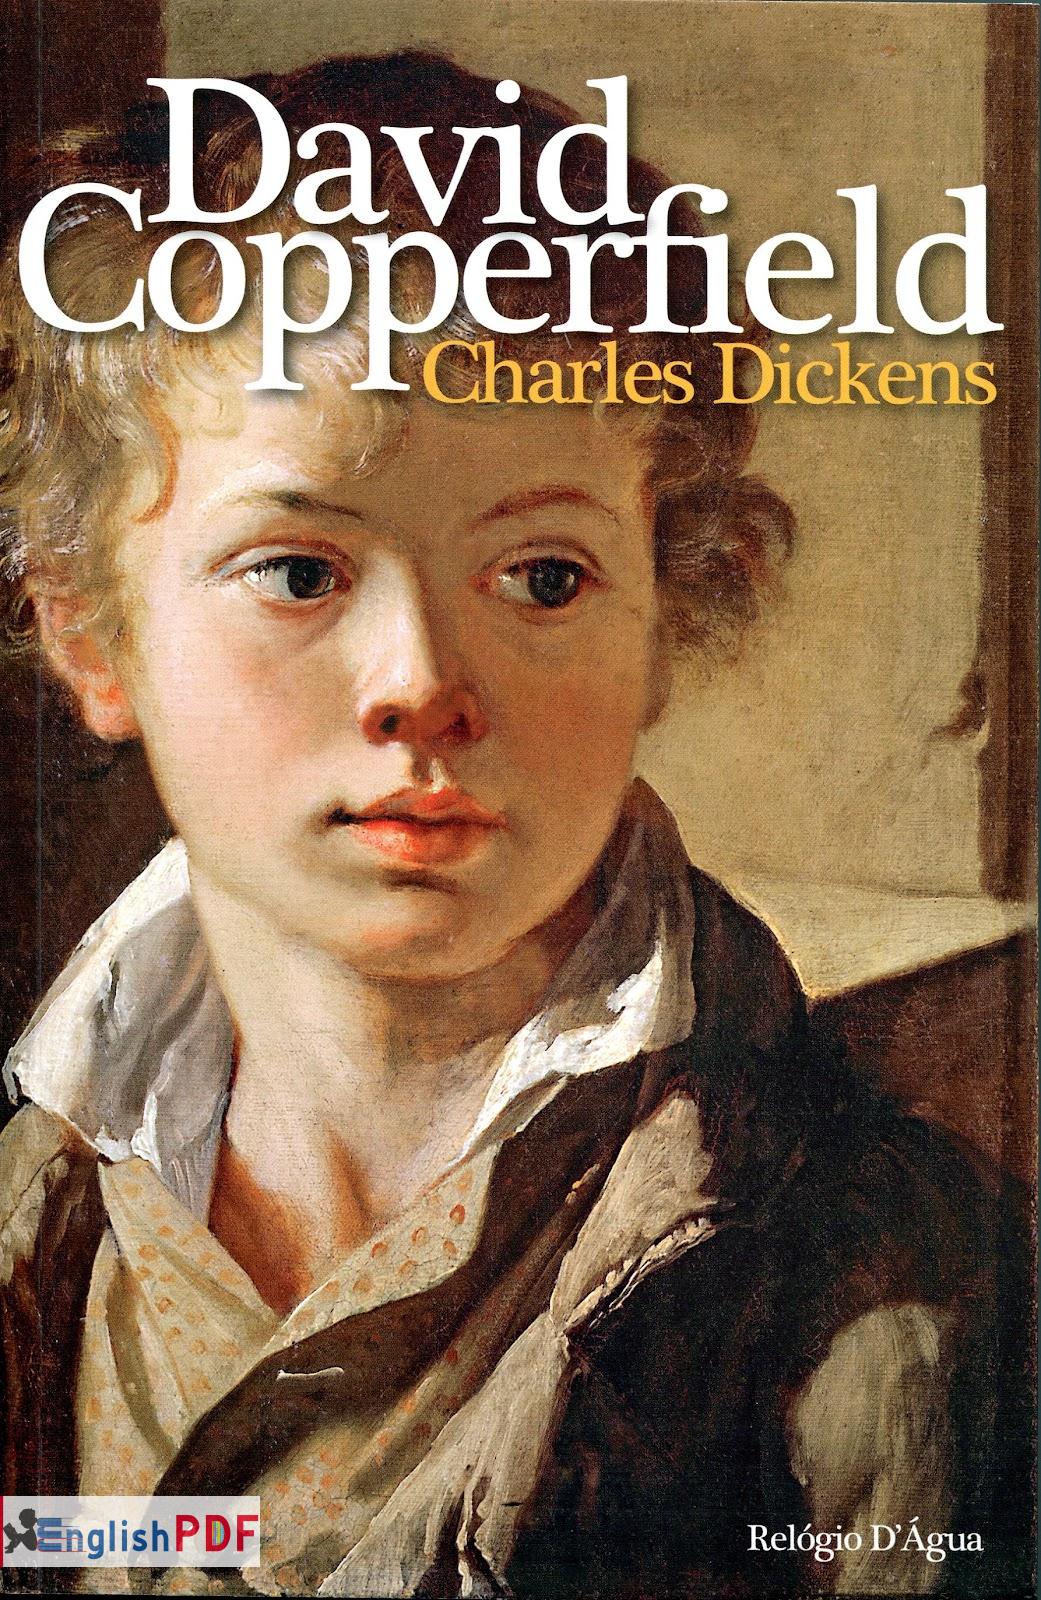 David Copperfield PDF Download by Charles Dickens